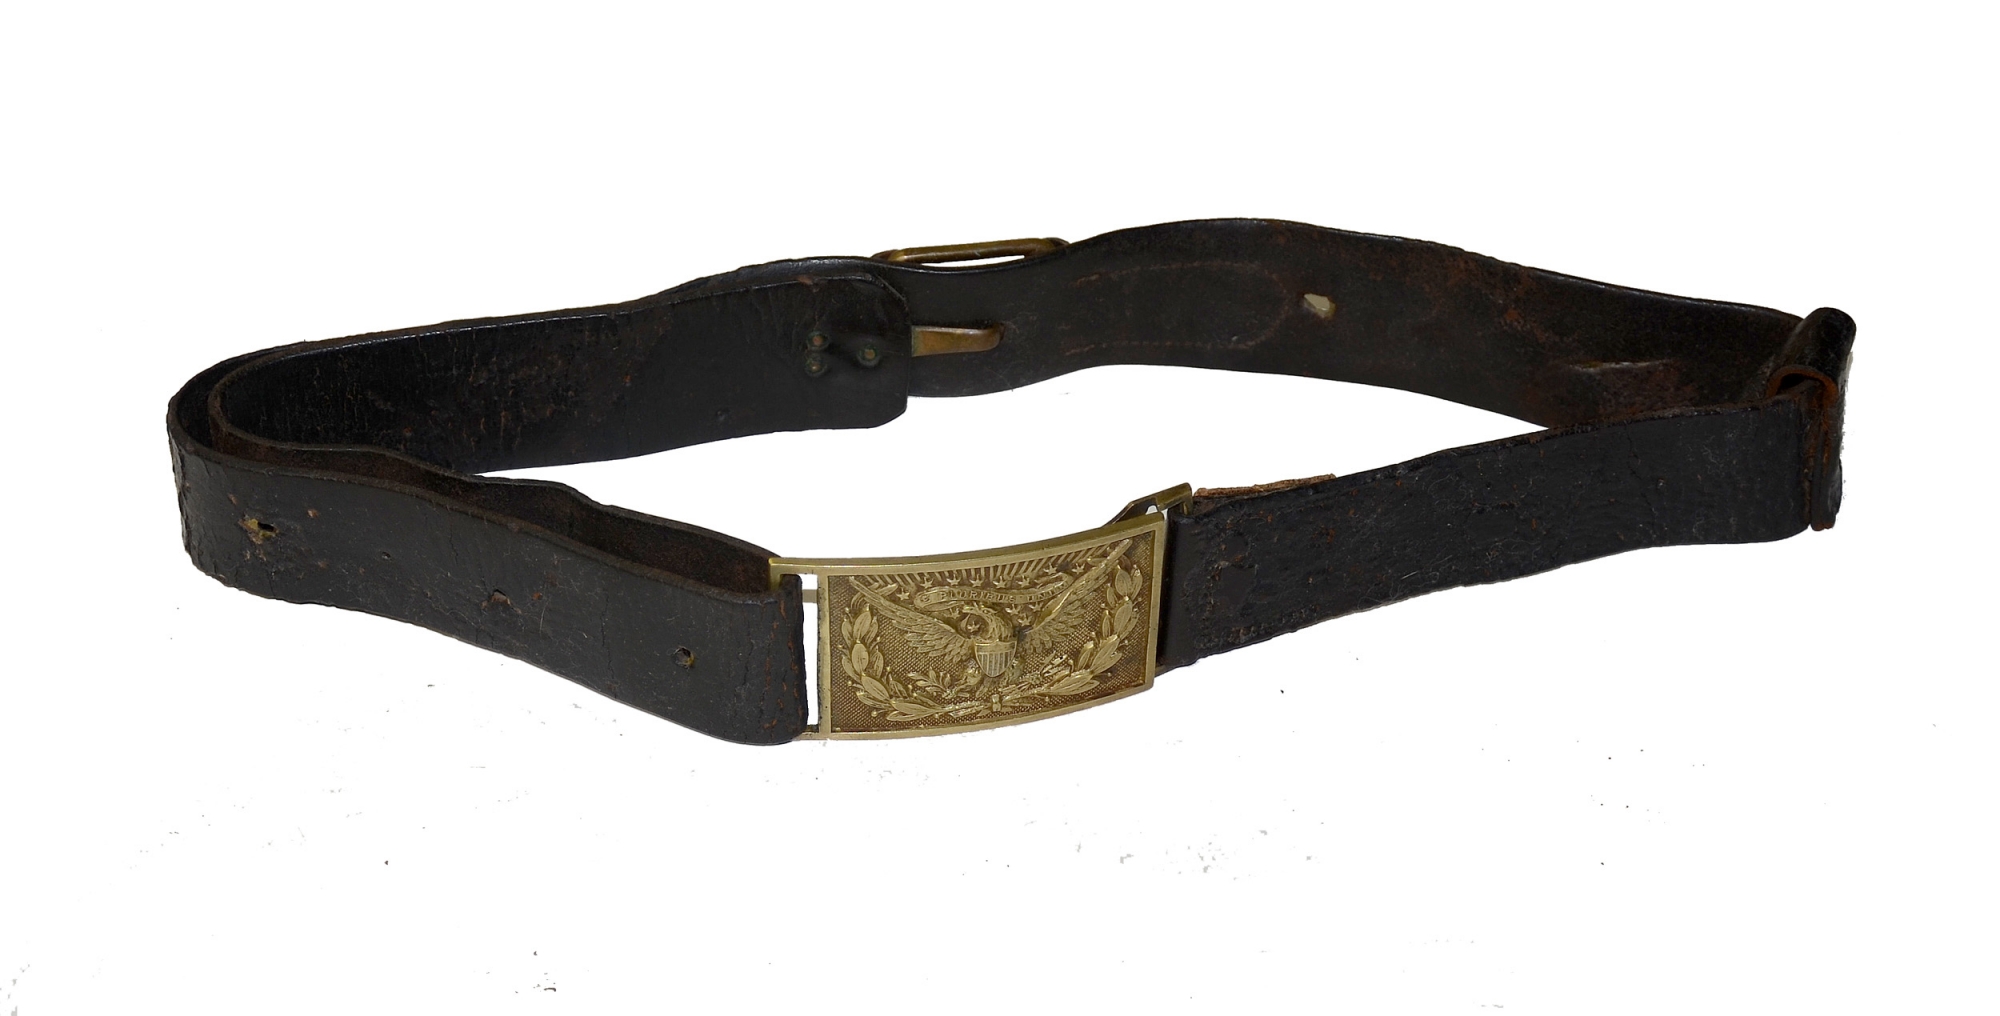  US Civil War Cavalry Union Officers Army Hand Made Leather  Sword Belt Reproduct With Eagle Buckle : Clothing, Shoes & Jewelry